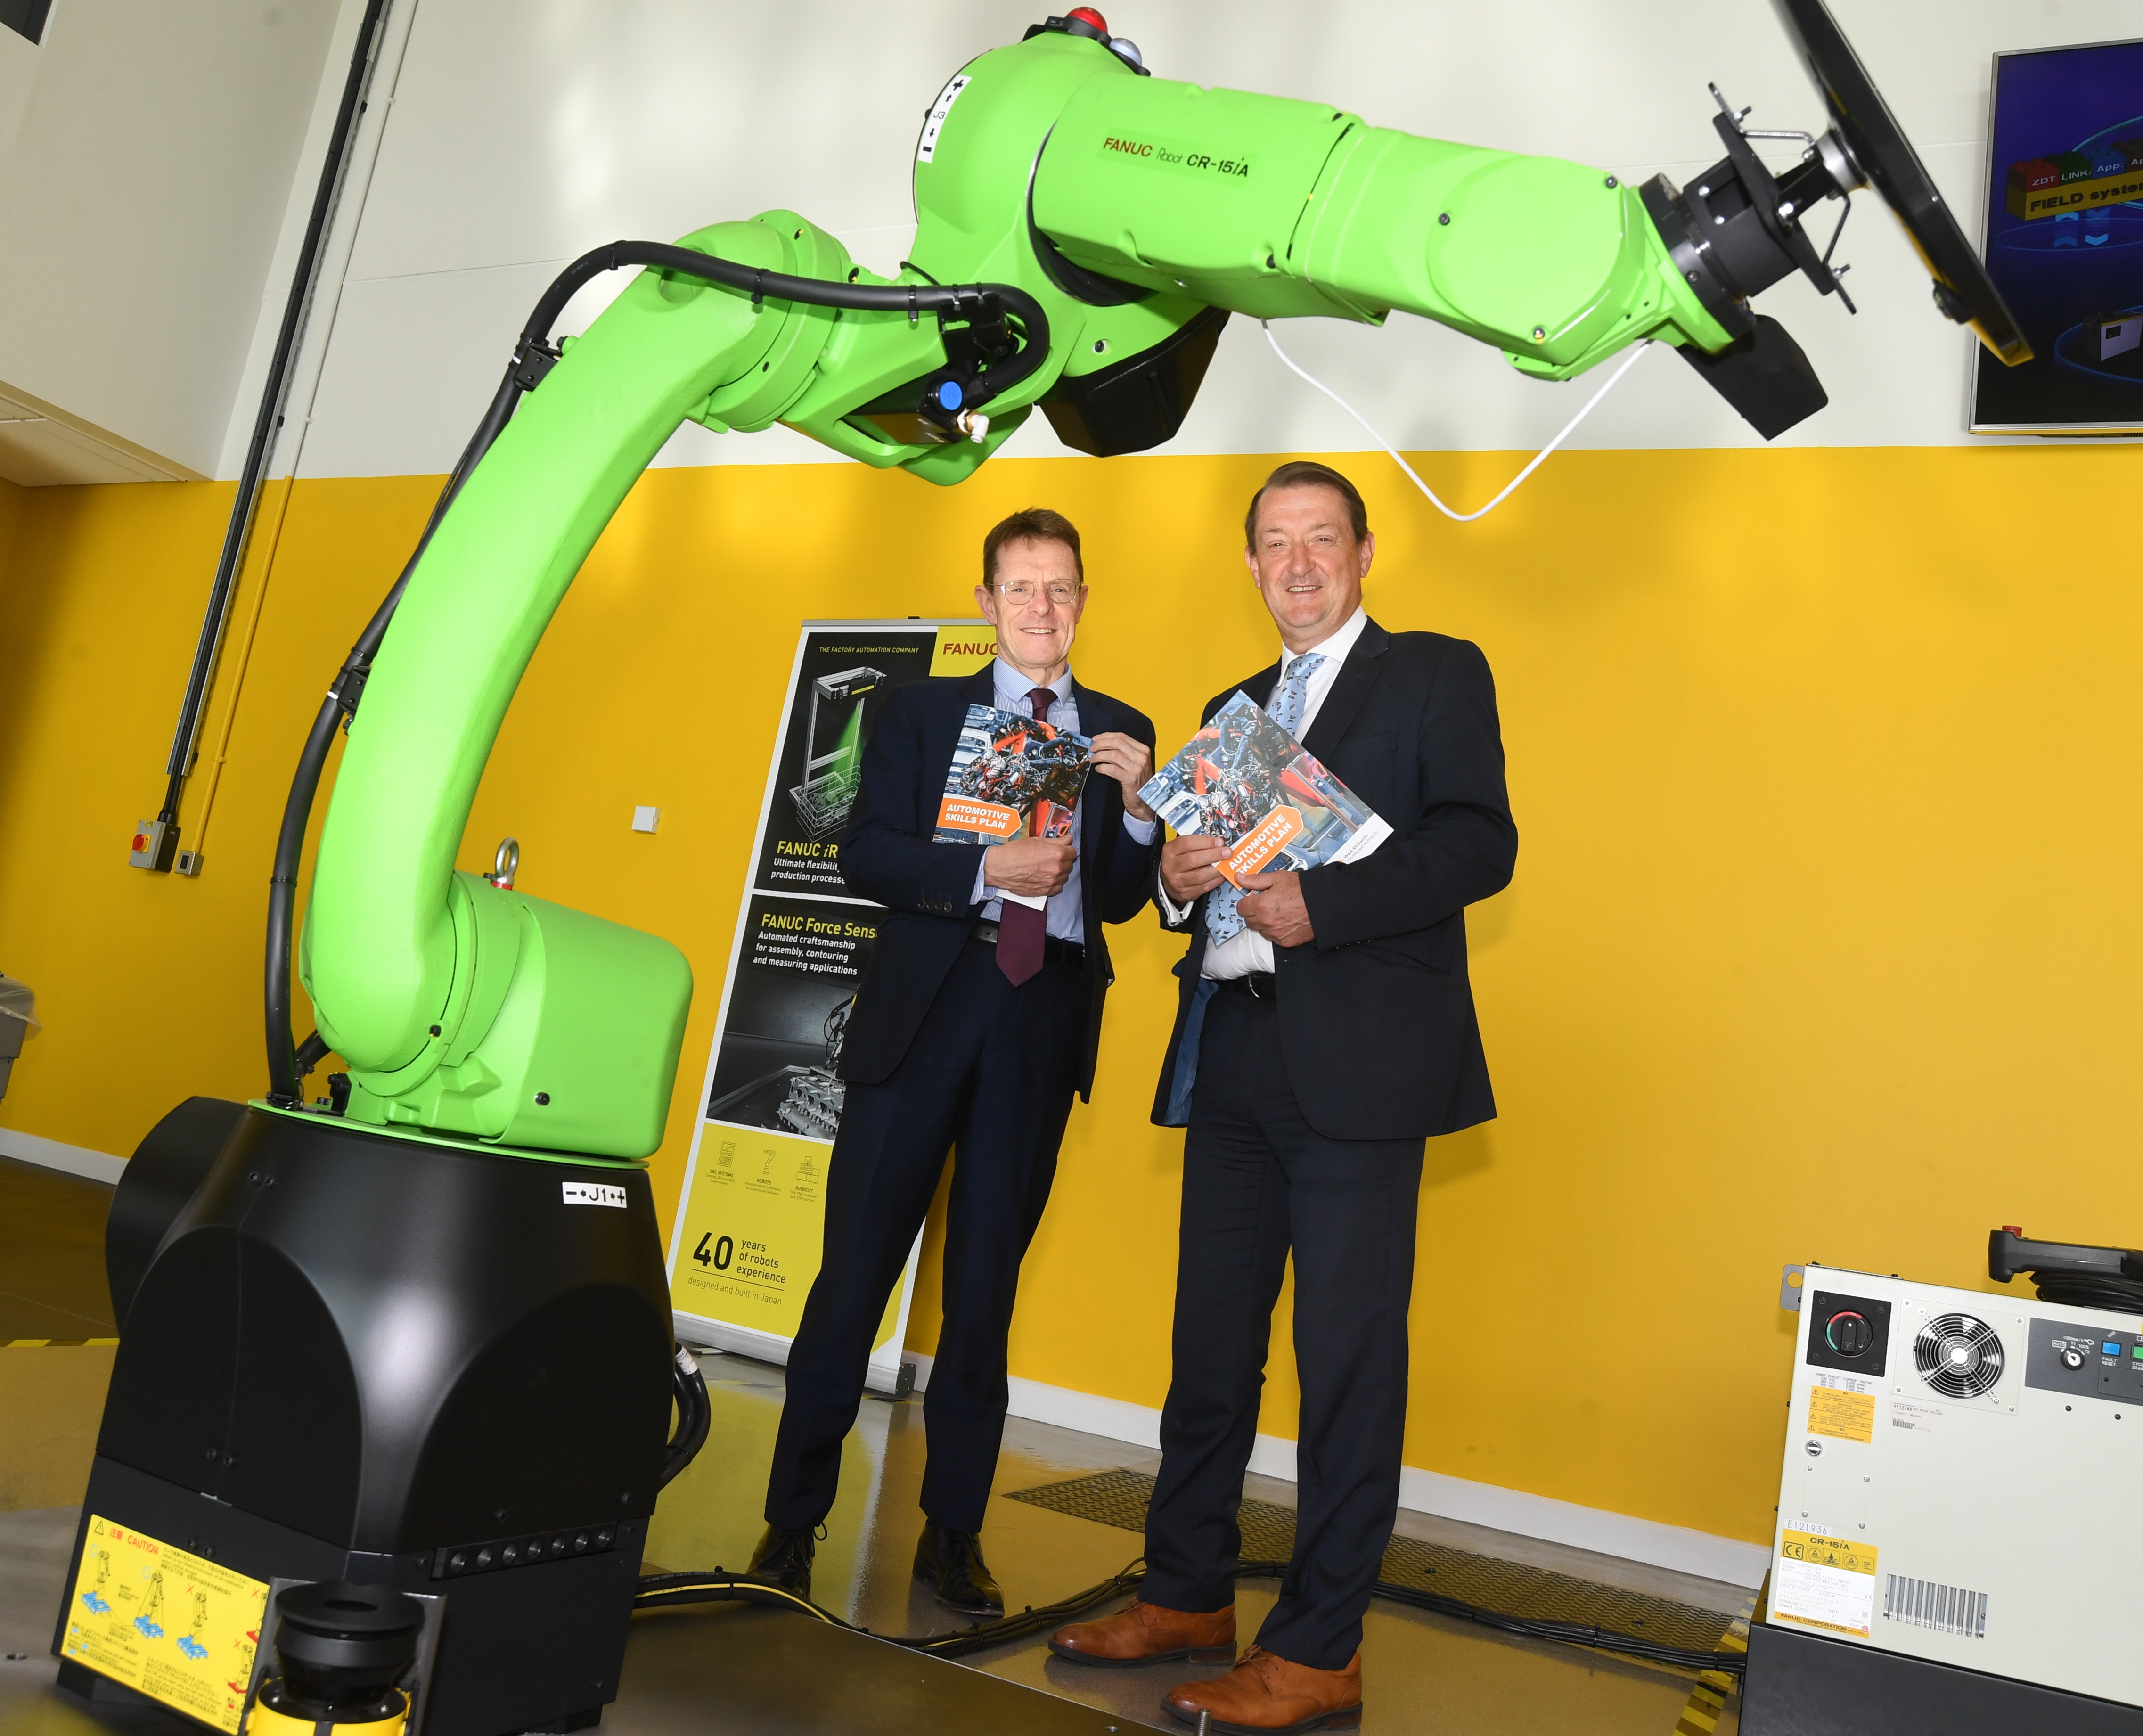 Mayor of the West Midlands Andy Street with Nick Abell, vice chair of the Coventry and Warwickshire Local Enterprise Partnership, at the launch of the Automotive Skills Plan at FANUC UK